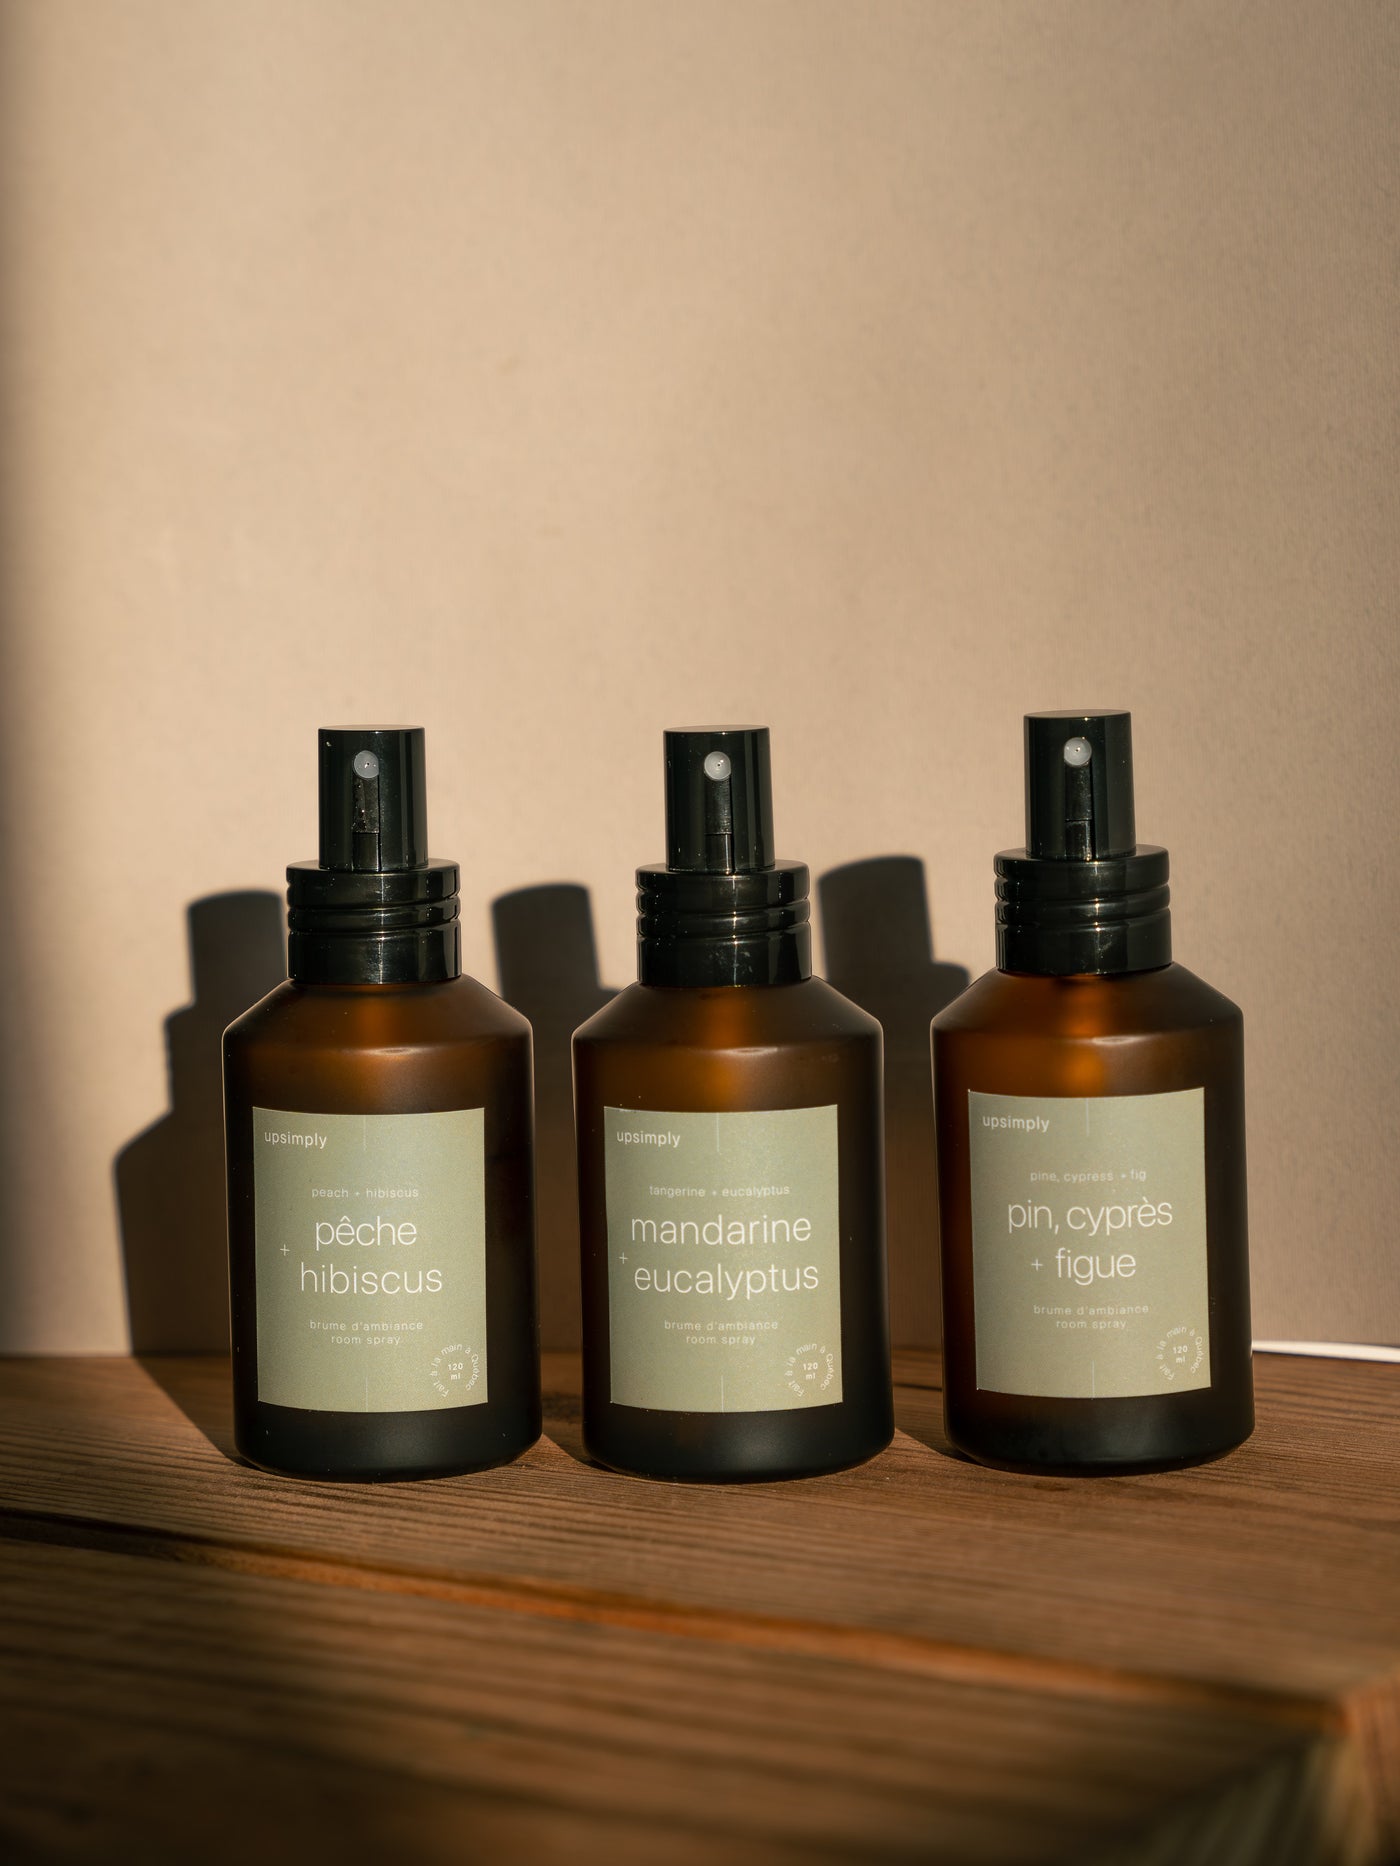 Room mist - Pine, cypress and fig